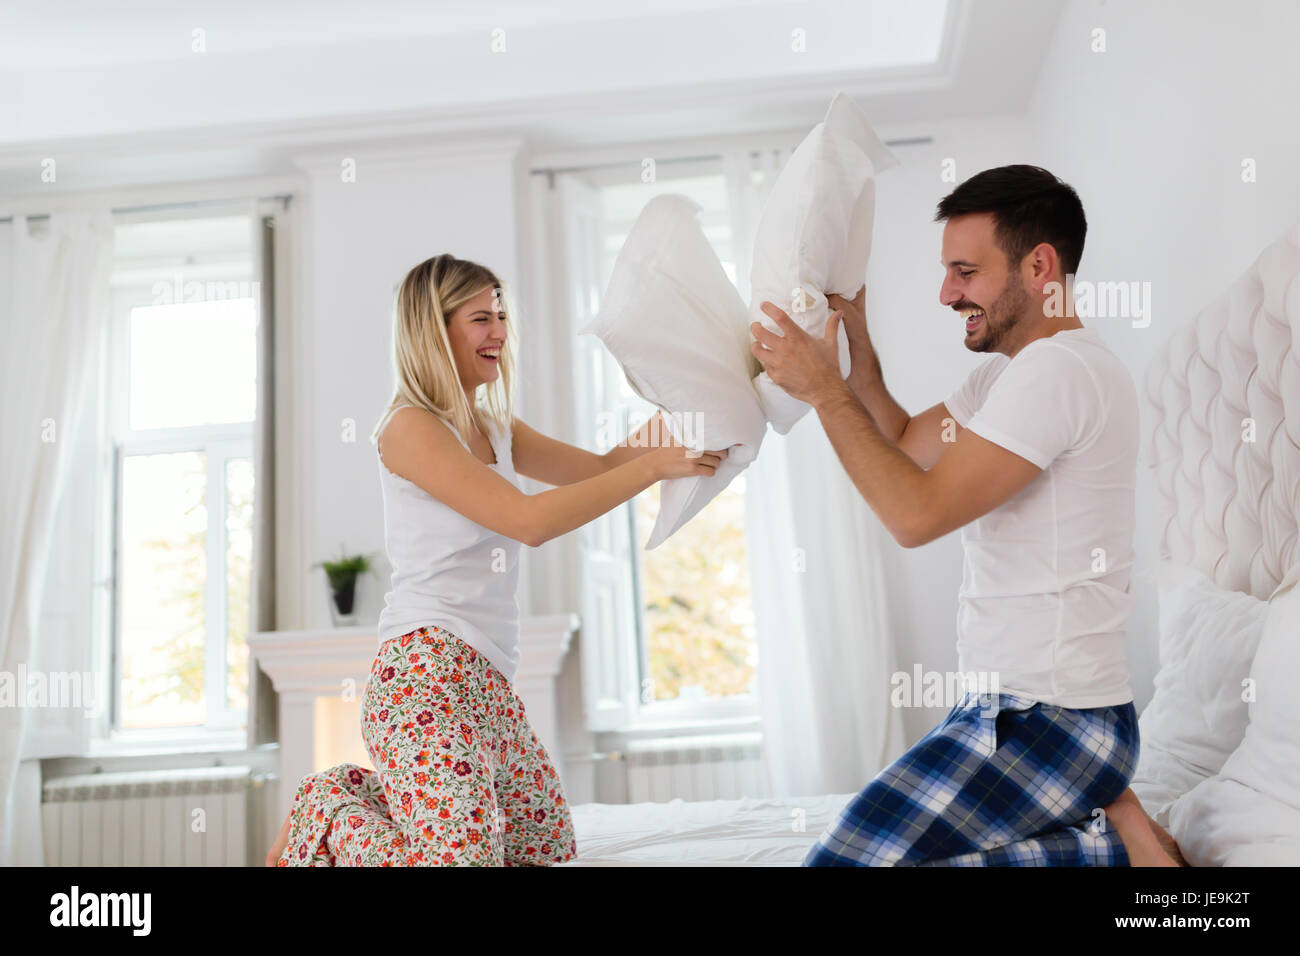 Happy couple fighting with pillows in bed Stock Photo